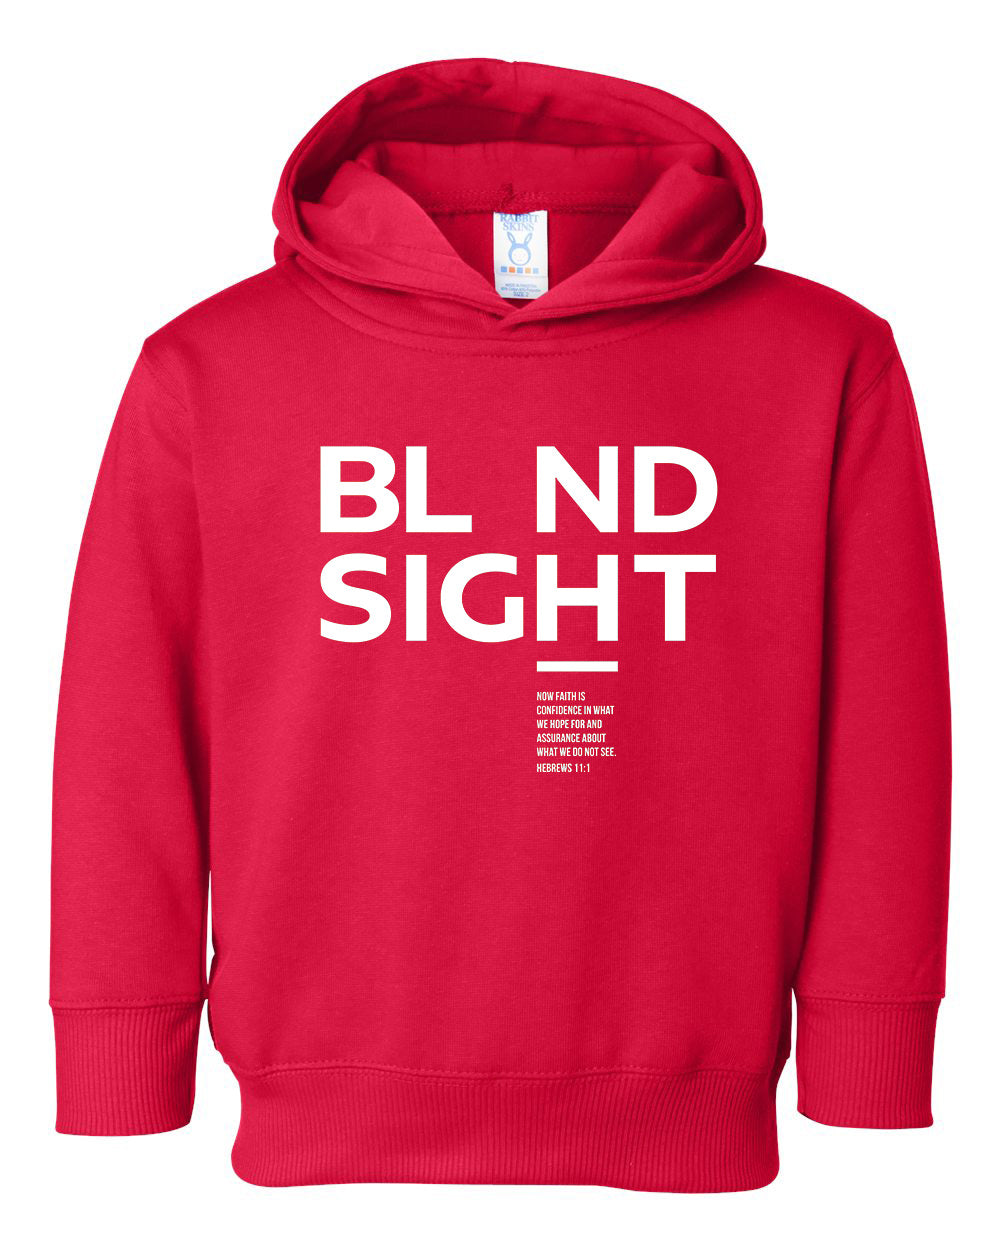 BL ND Sight 2 Toddler Hoodie